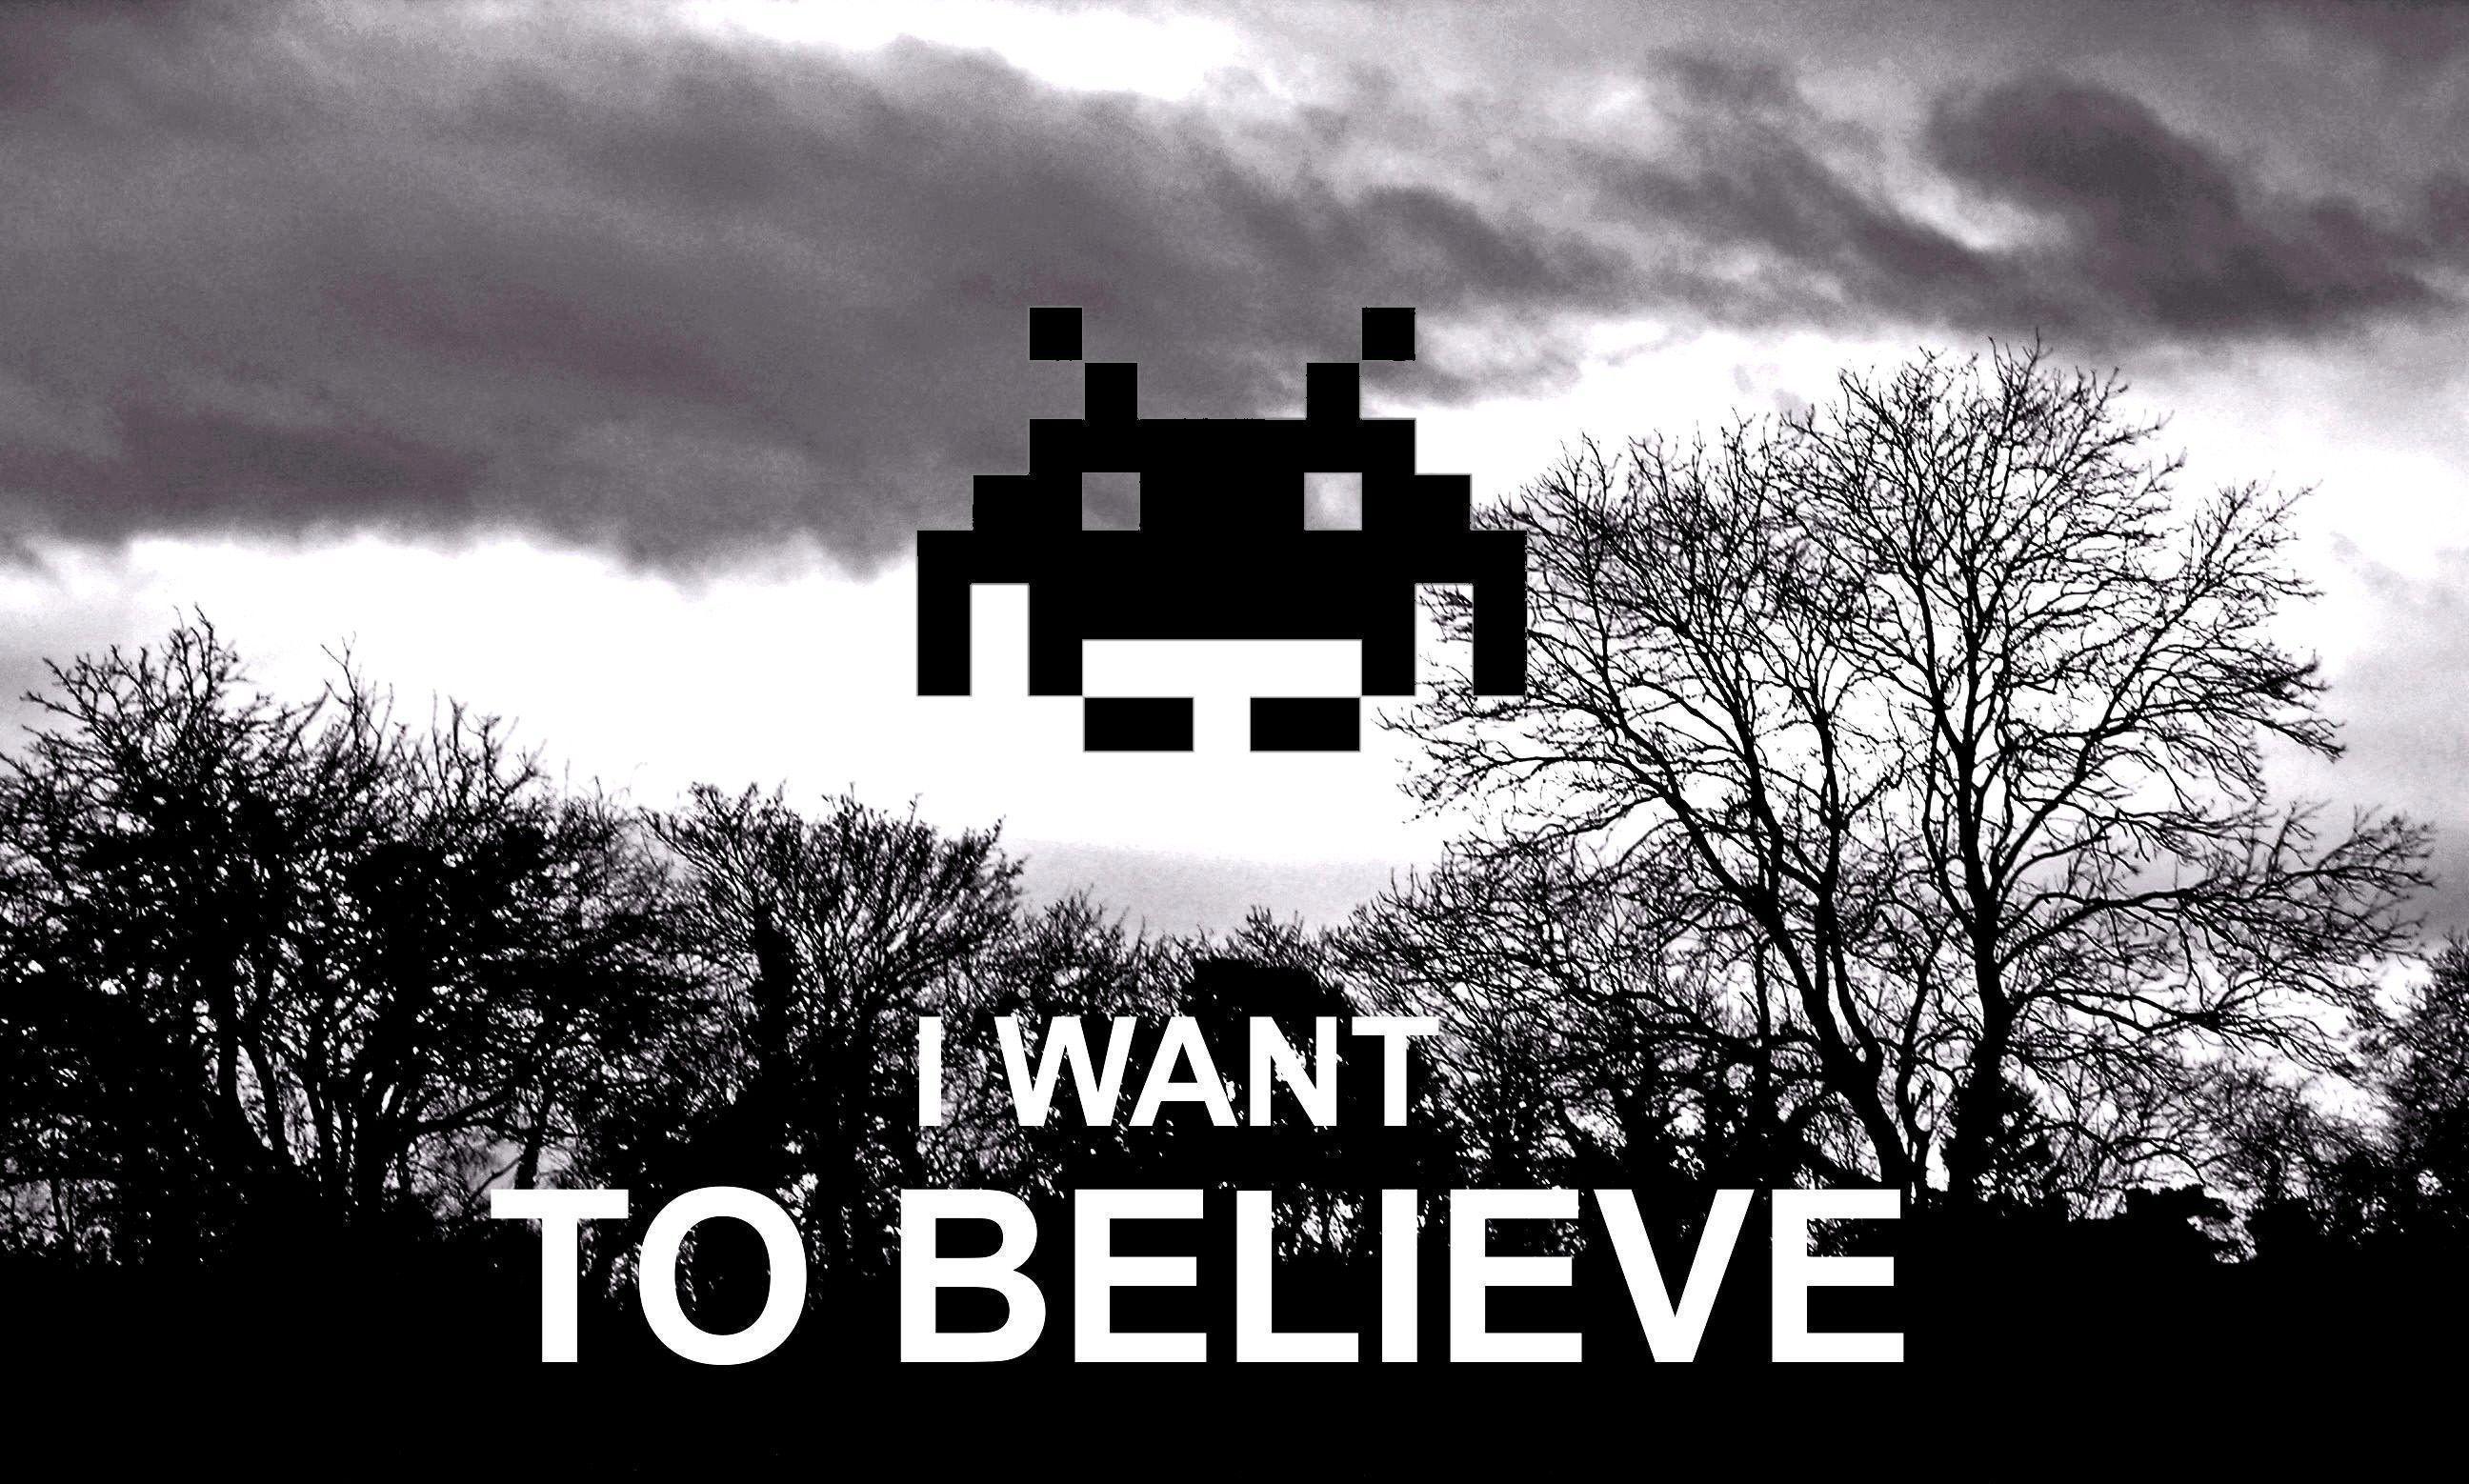 Space Invader wallpaper and image, picture, photo